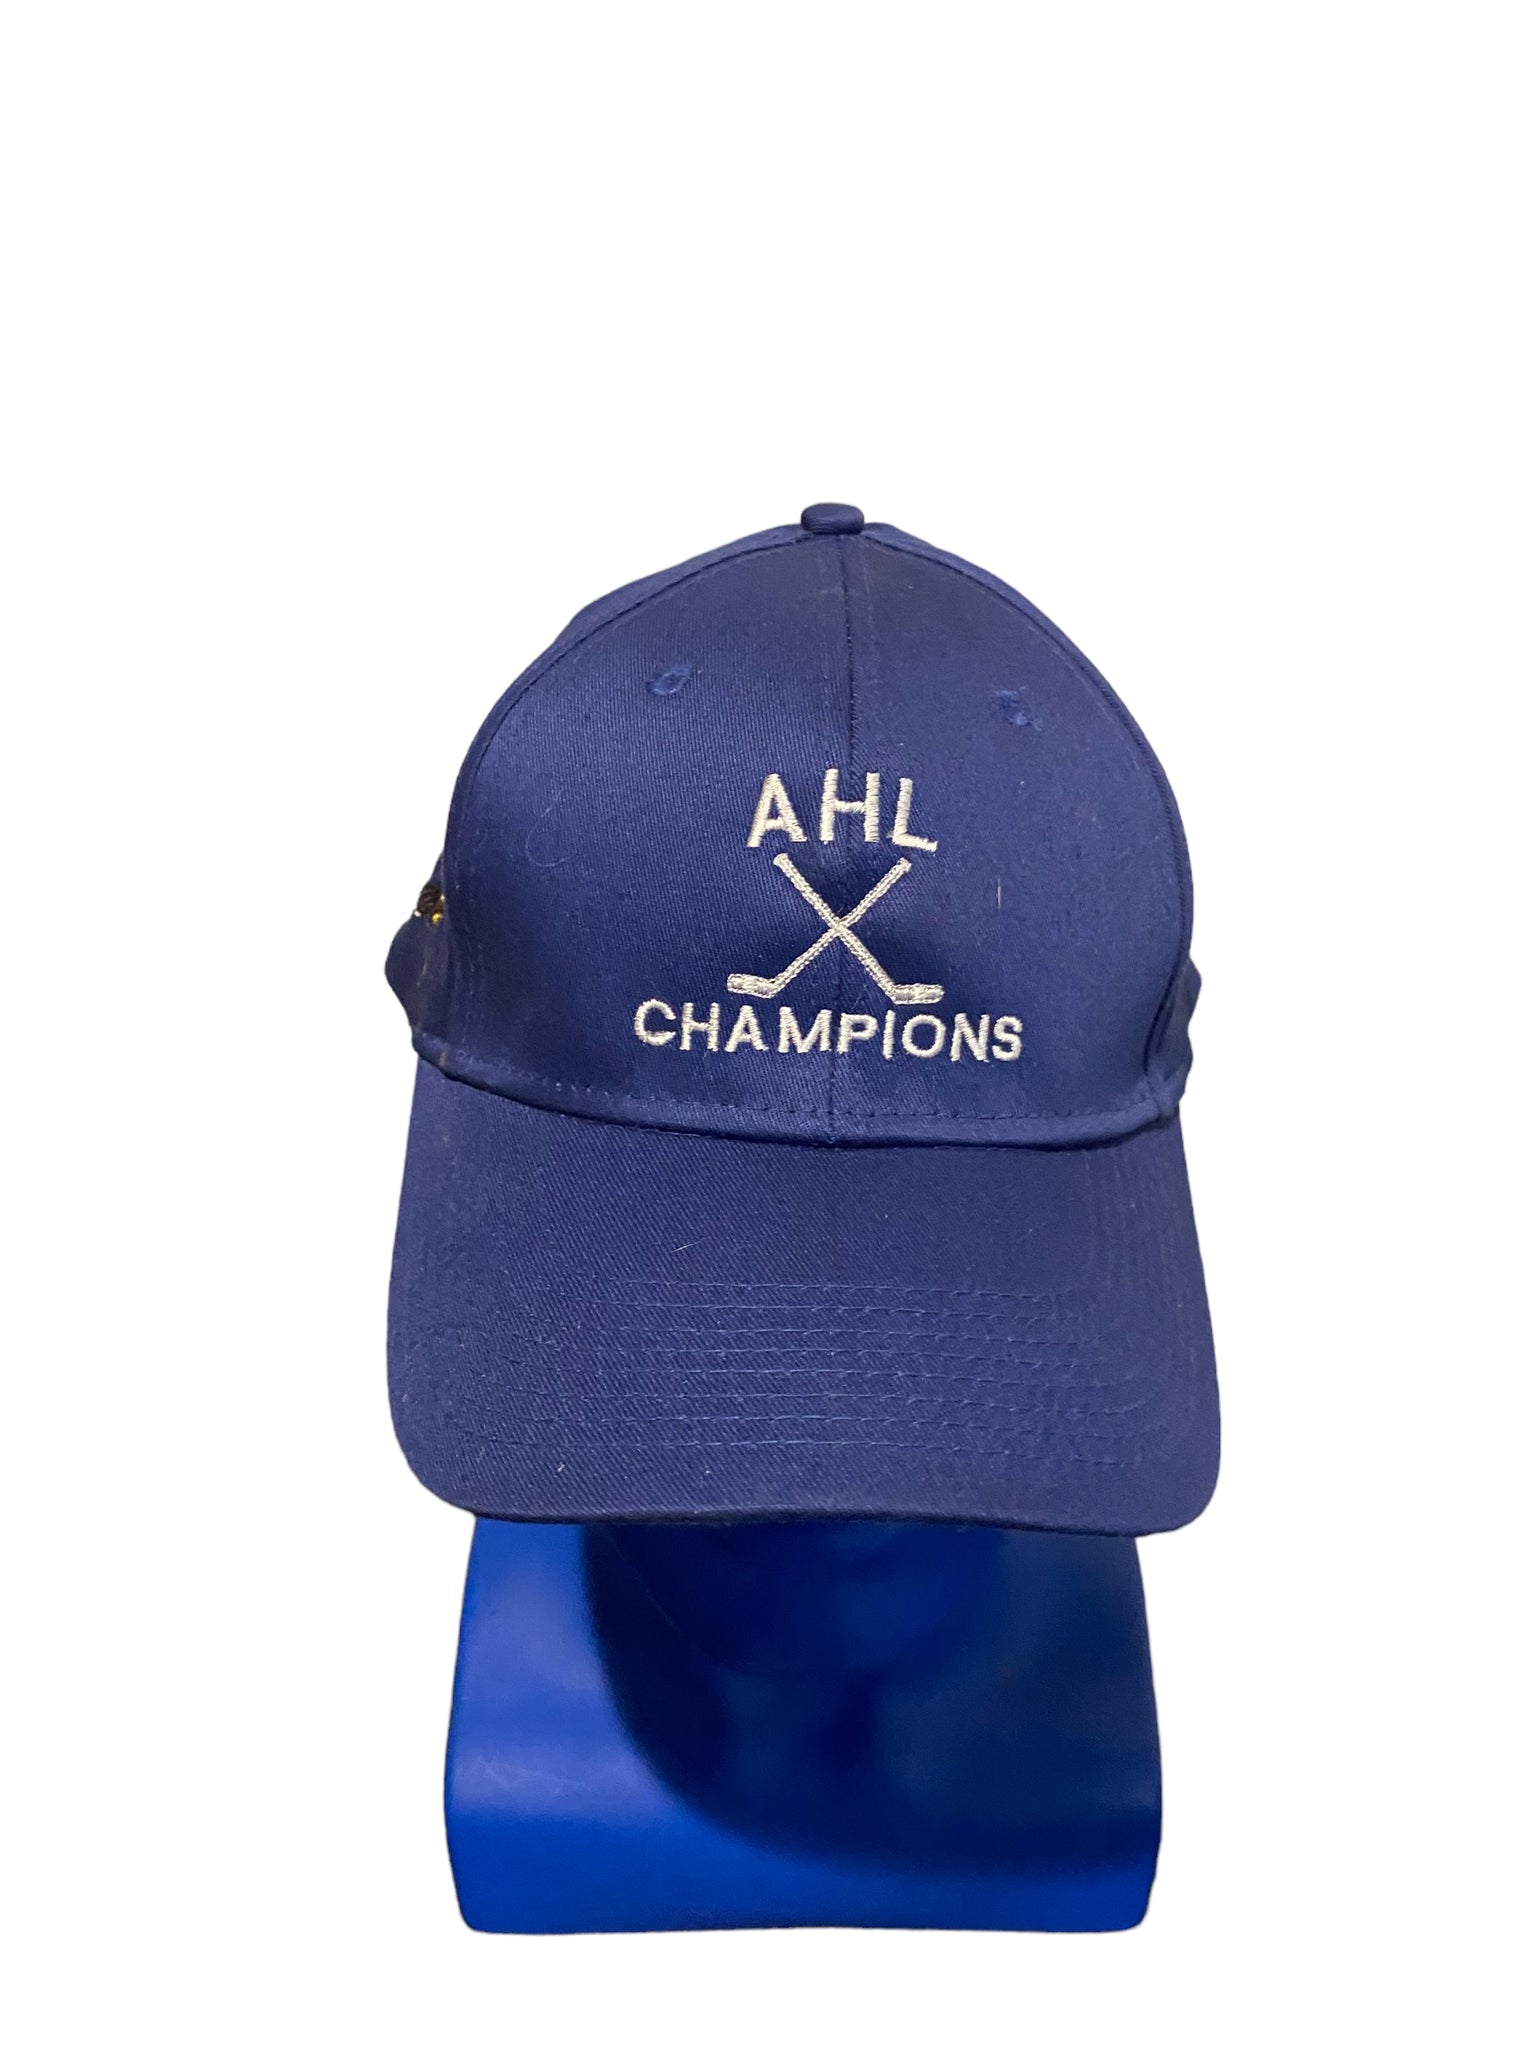 Ahl Champions On Front With Condor On Side Bakersfield Condors Snapback Hat